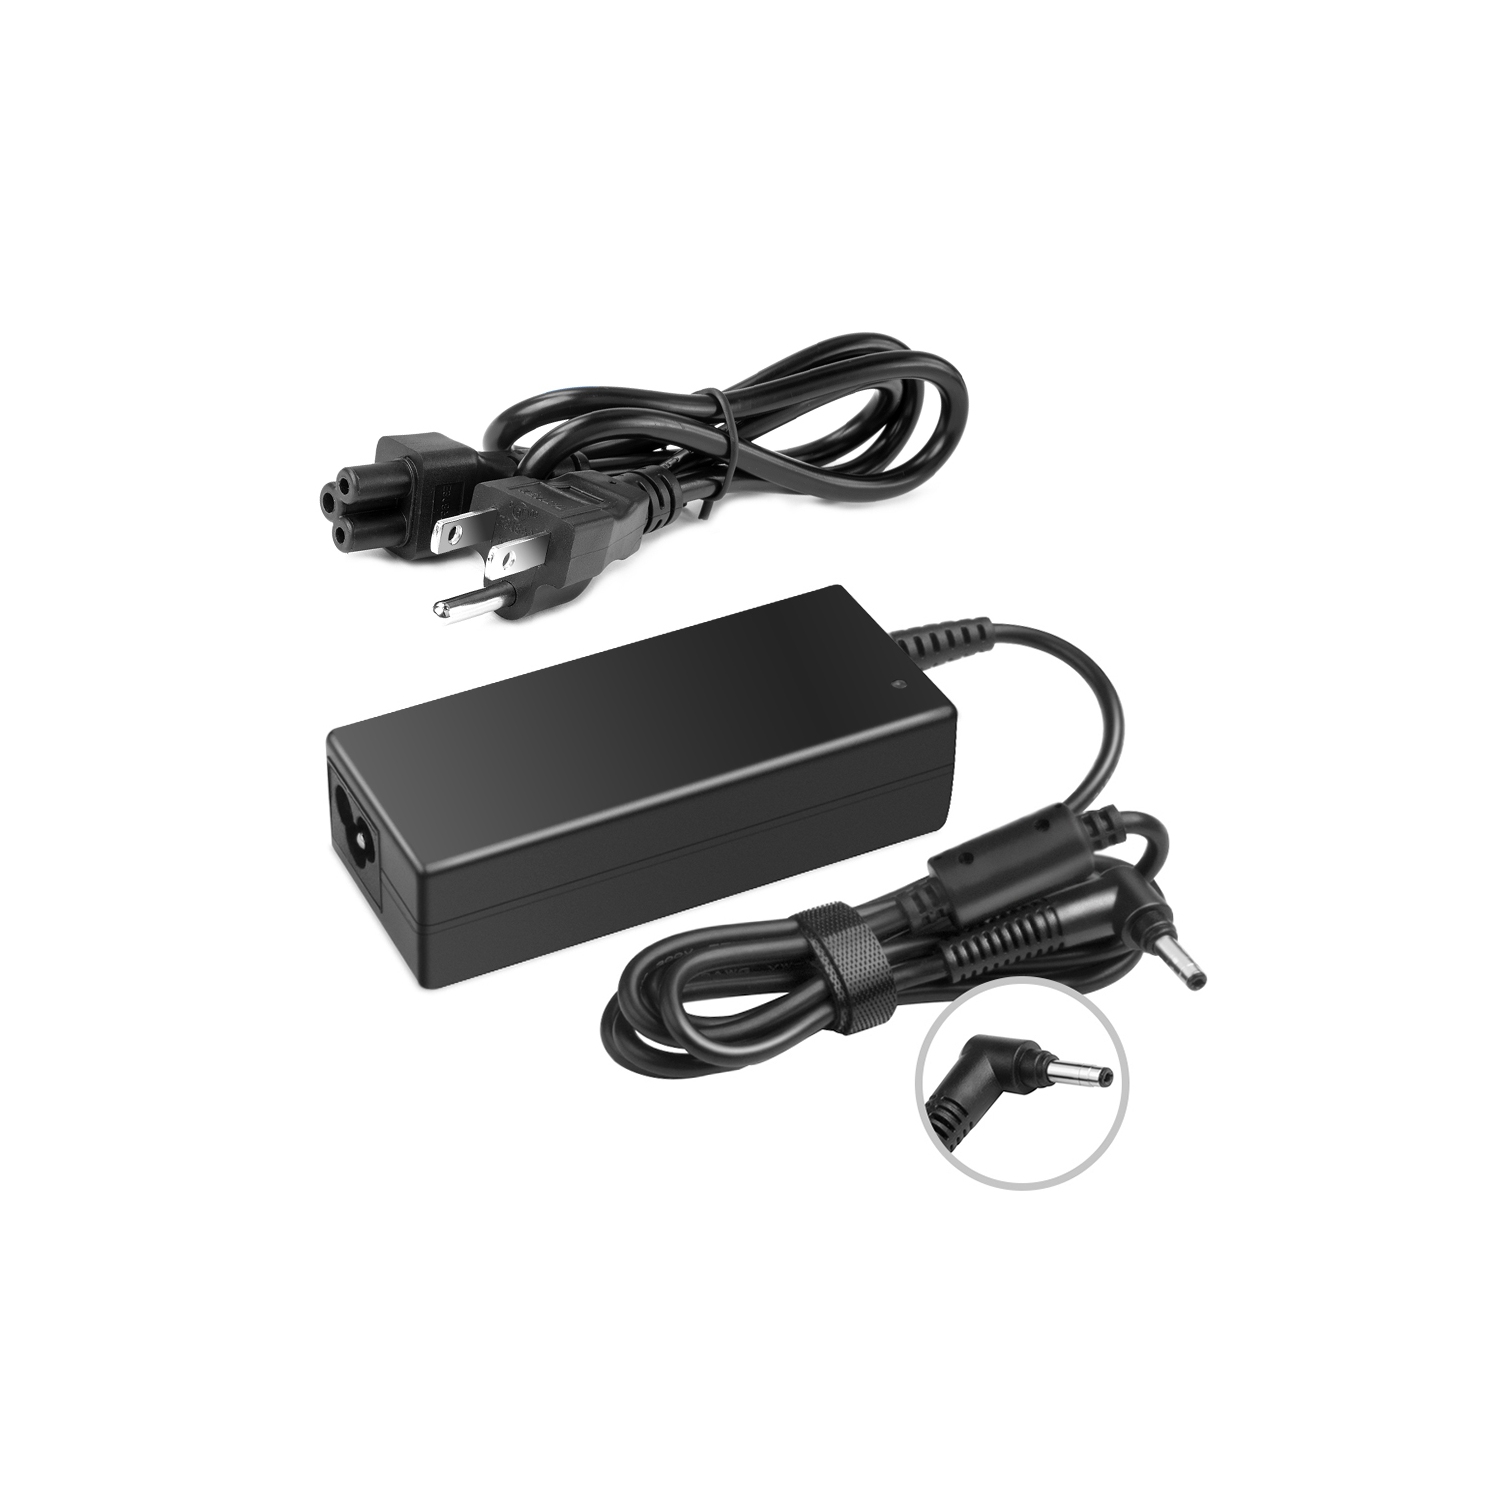 Laptop Charger 65W 20V 3.25A Power Supply AC Adapter for IdeaPad 330-14, 330-15, 330-17, 510-15, 330s-14, 330s-15 Lenovo Flex 6-14